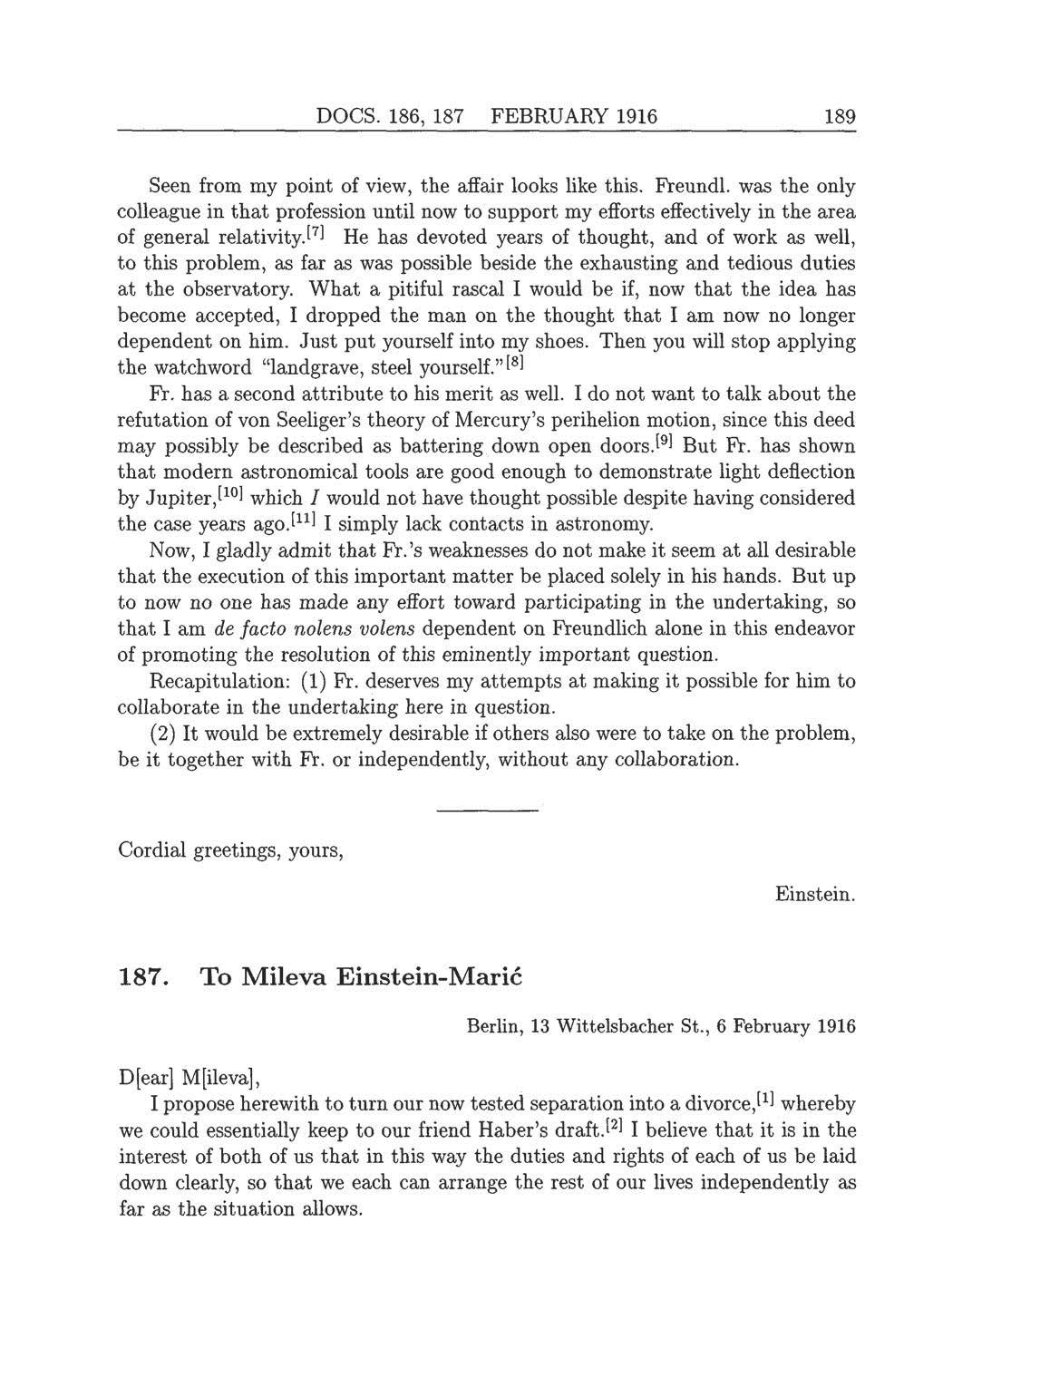 Volume 8: The Berlin Years: Correspondence, 1914-1918 (English translation supplement) page 189